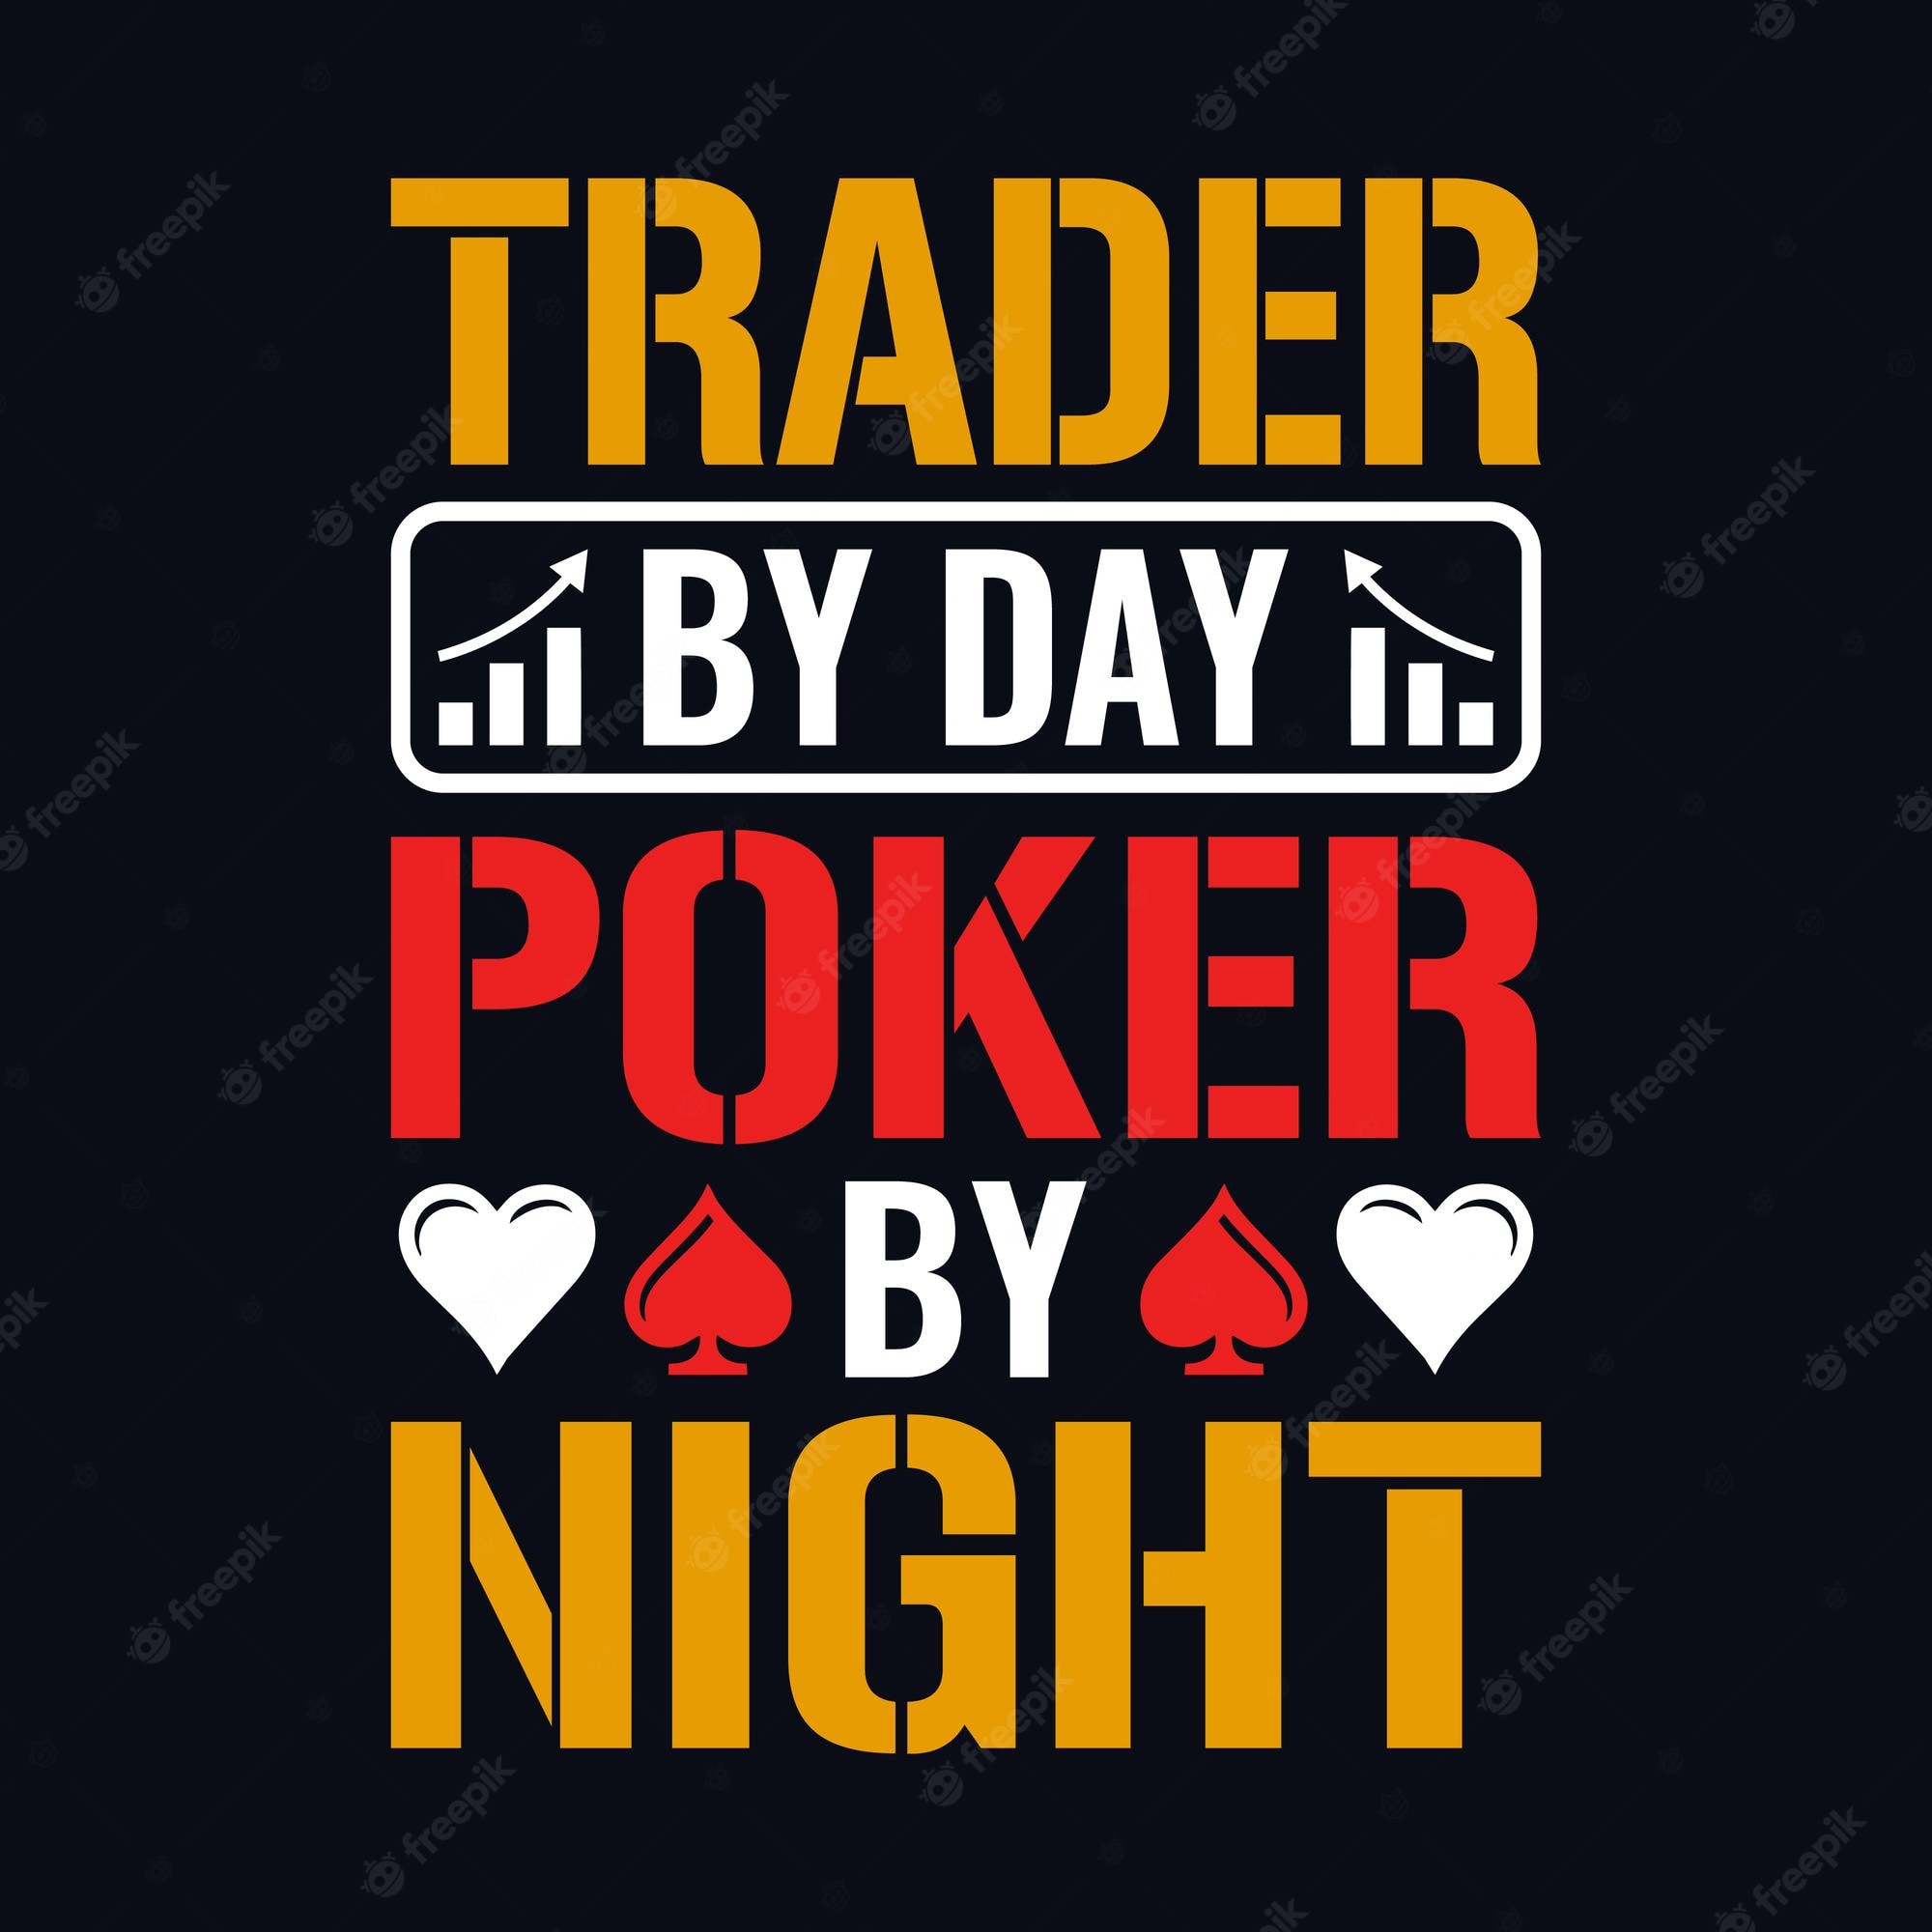 trader-by-day-poker-by-night-poker-quotes-t-shirt-design-vector-graphic_594747-588.jpg